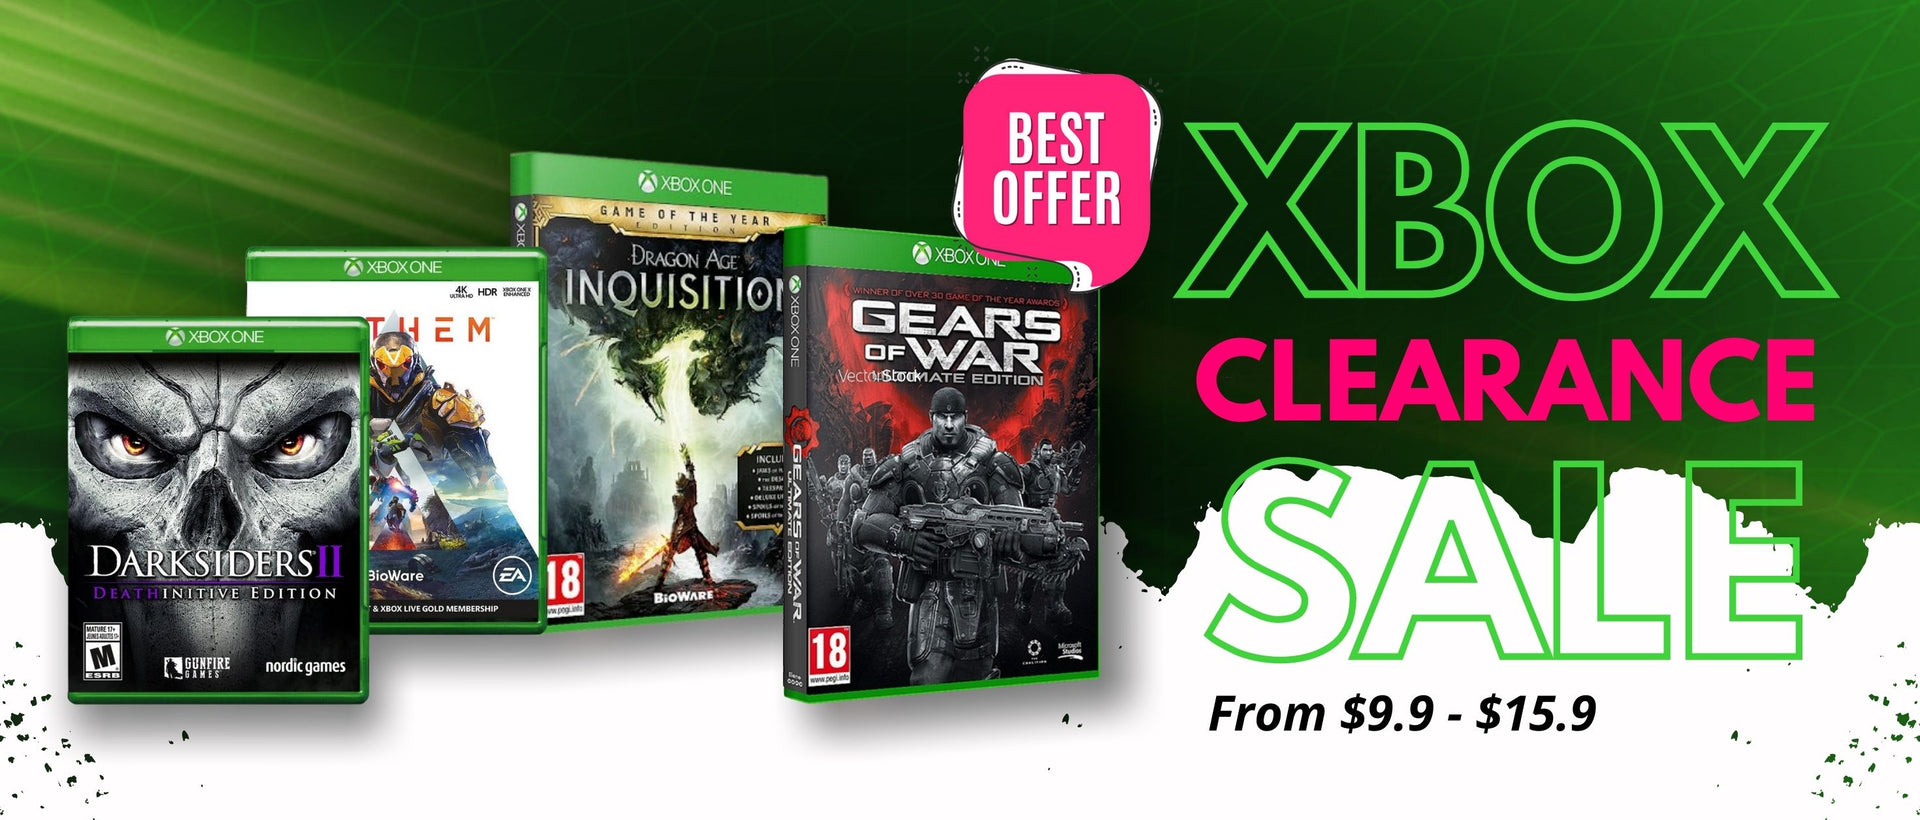 Xbox One Gears of War Ultimate Edition – Games Crazy Deals